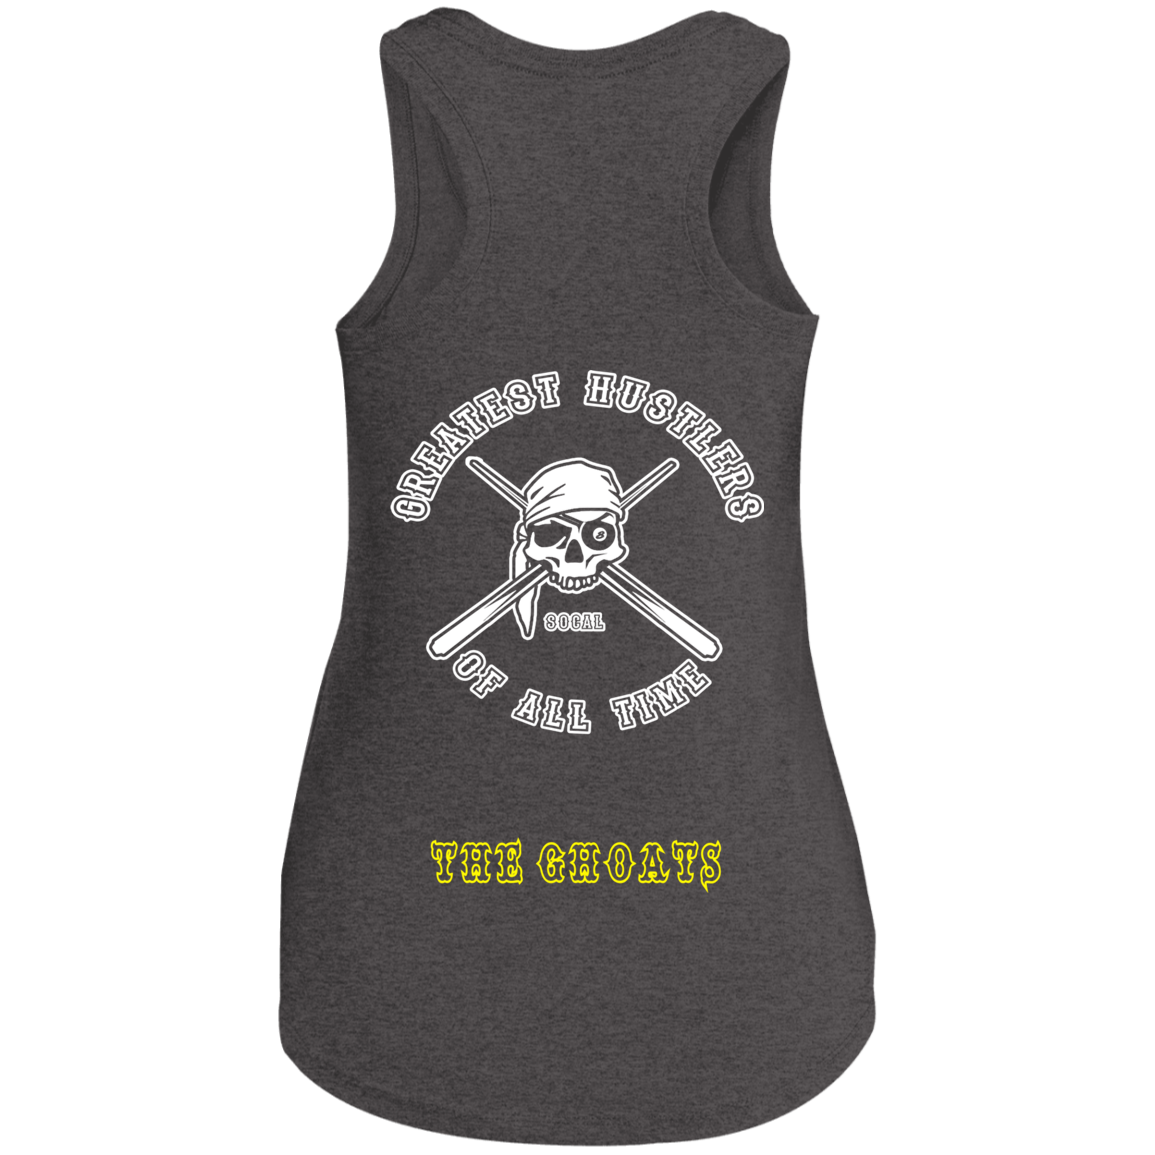 The GHOATS Custom Design. #4 Motorcycle Club Style. Ver 1/2. Ladies' Perfect Tri Racerback Tank